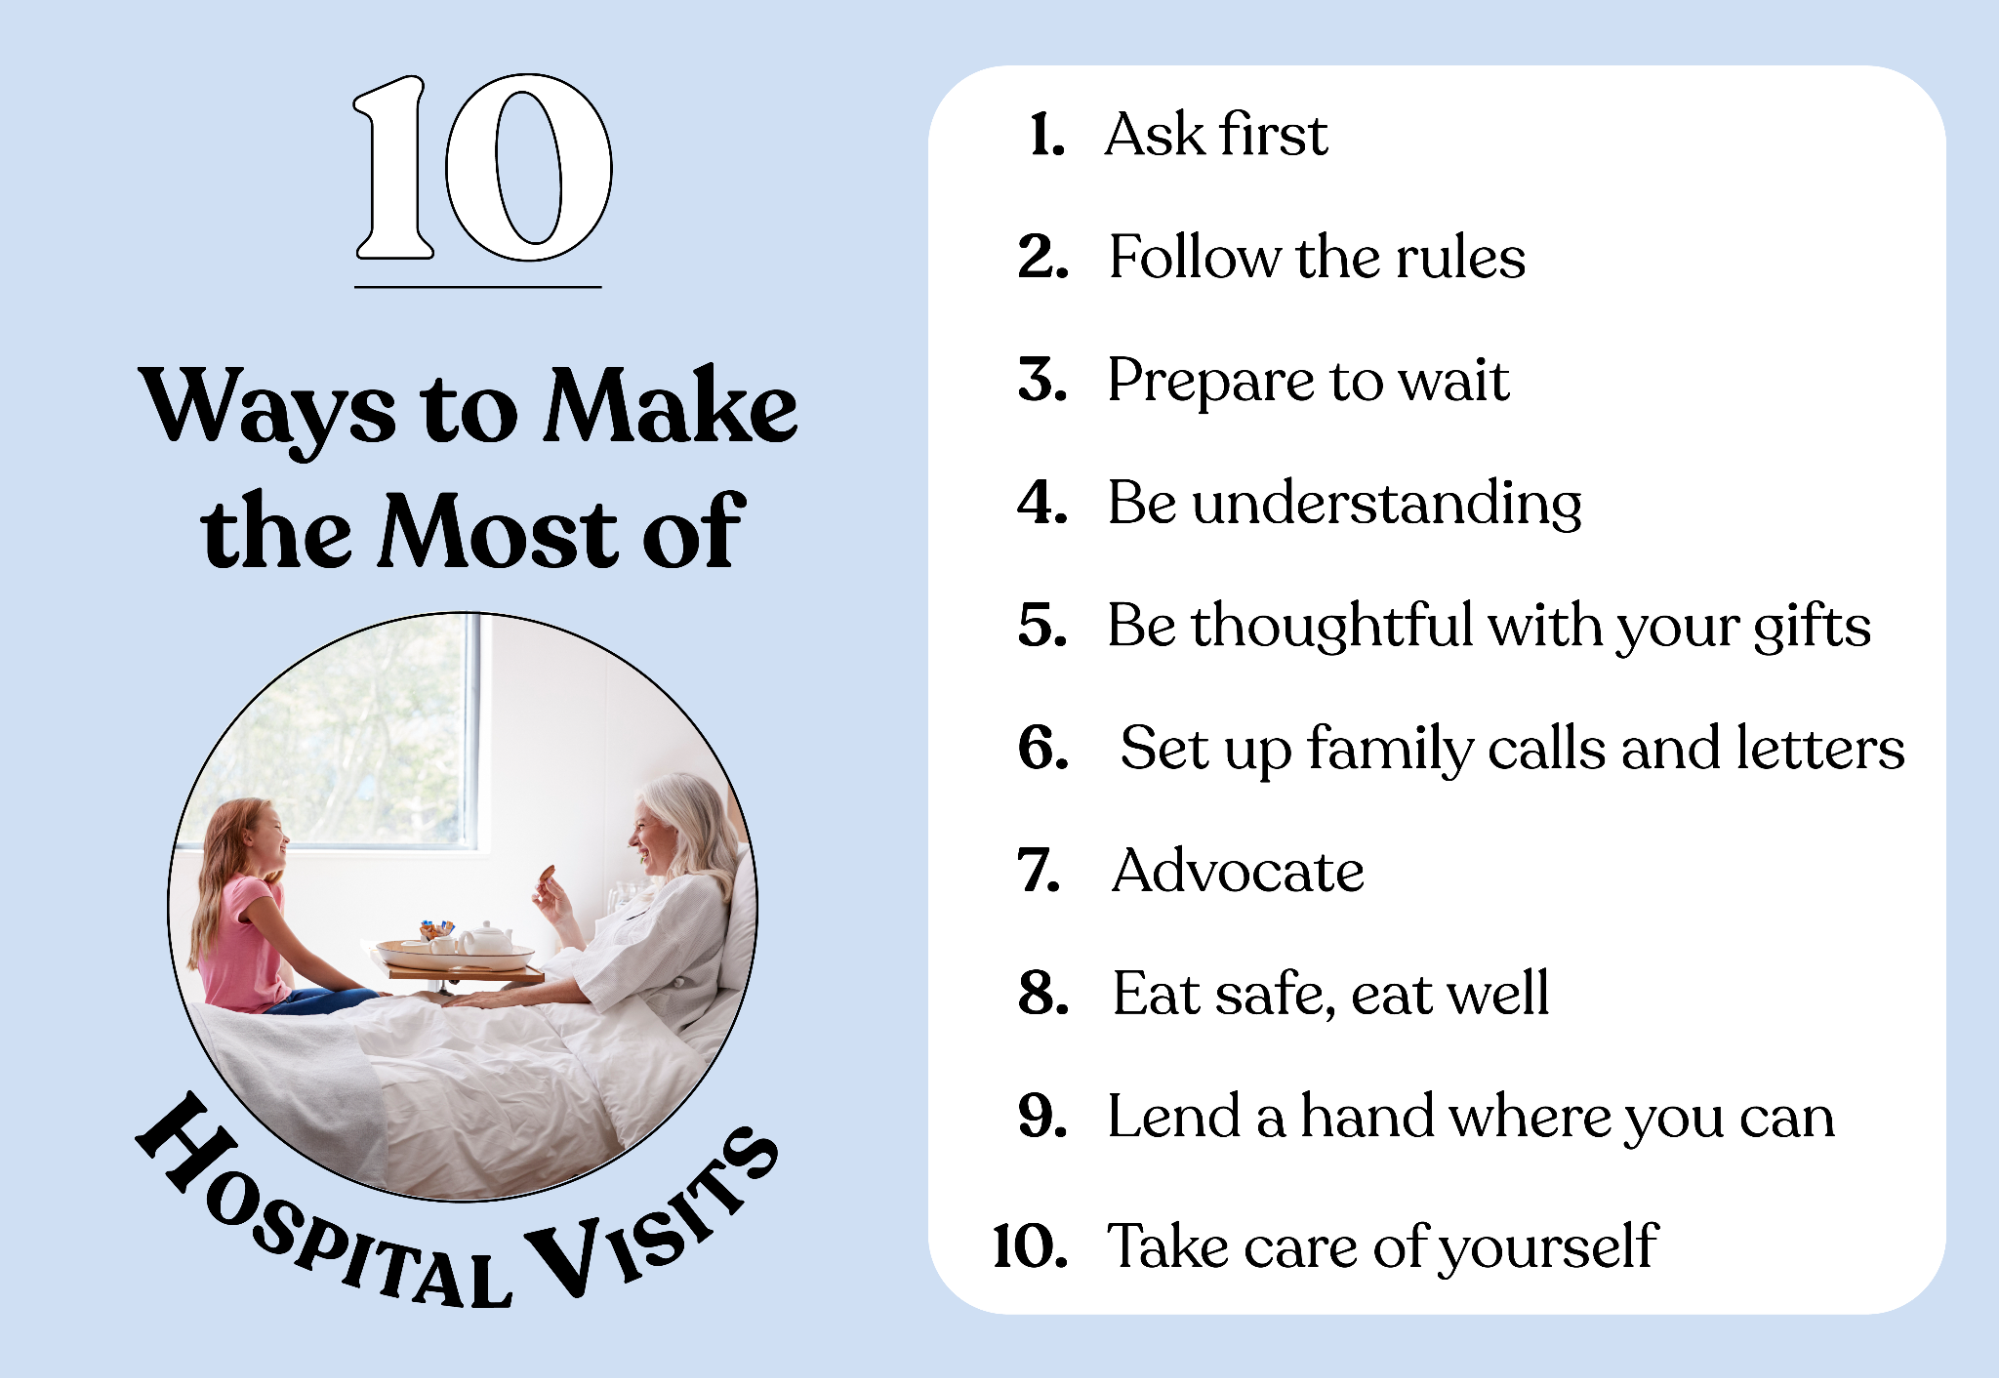 10 ways to make the most of hospital visits